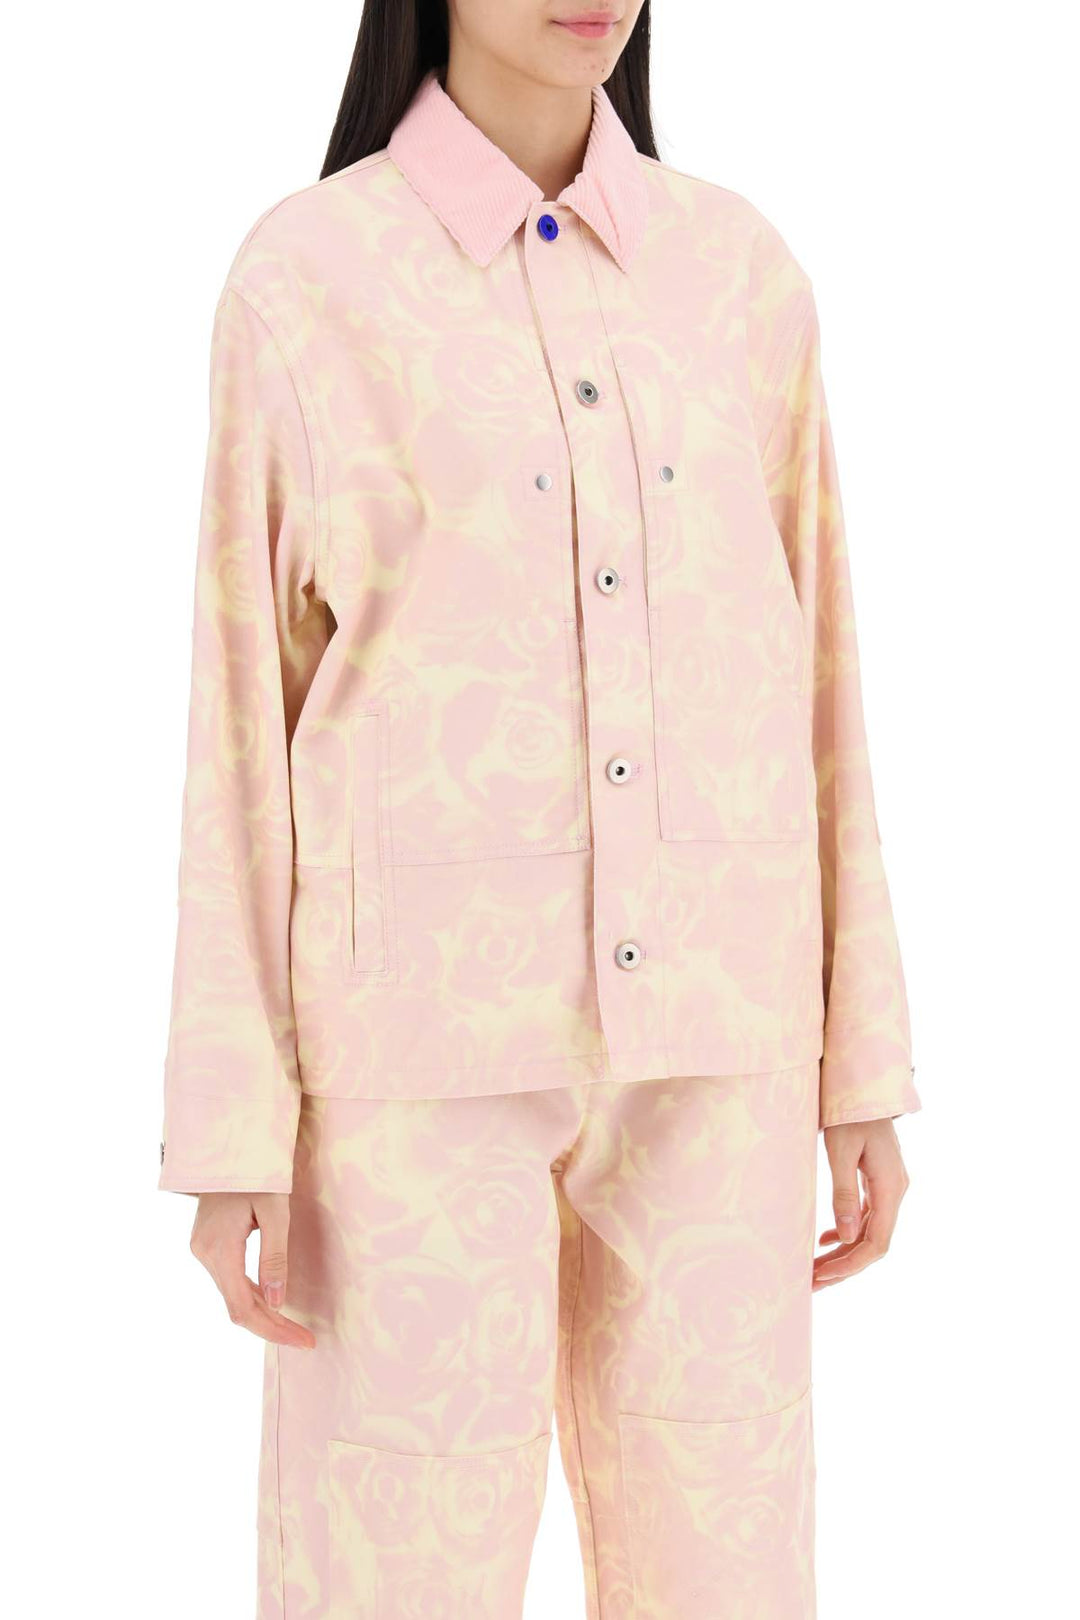 Burberry Canvas Workwear Jacket With Rose Print   Rosa